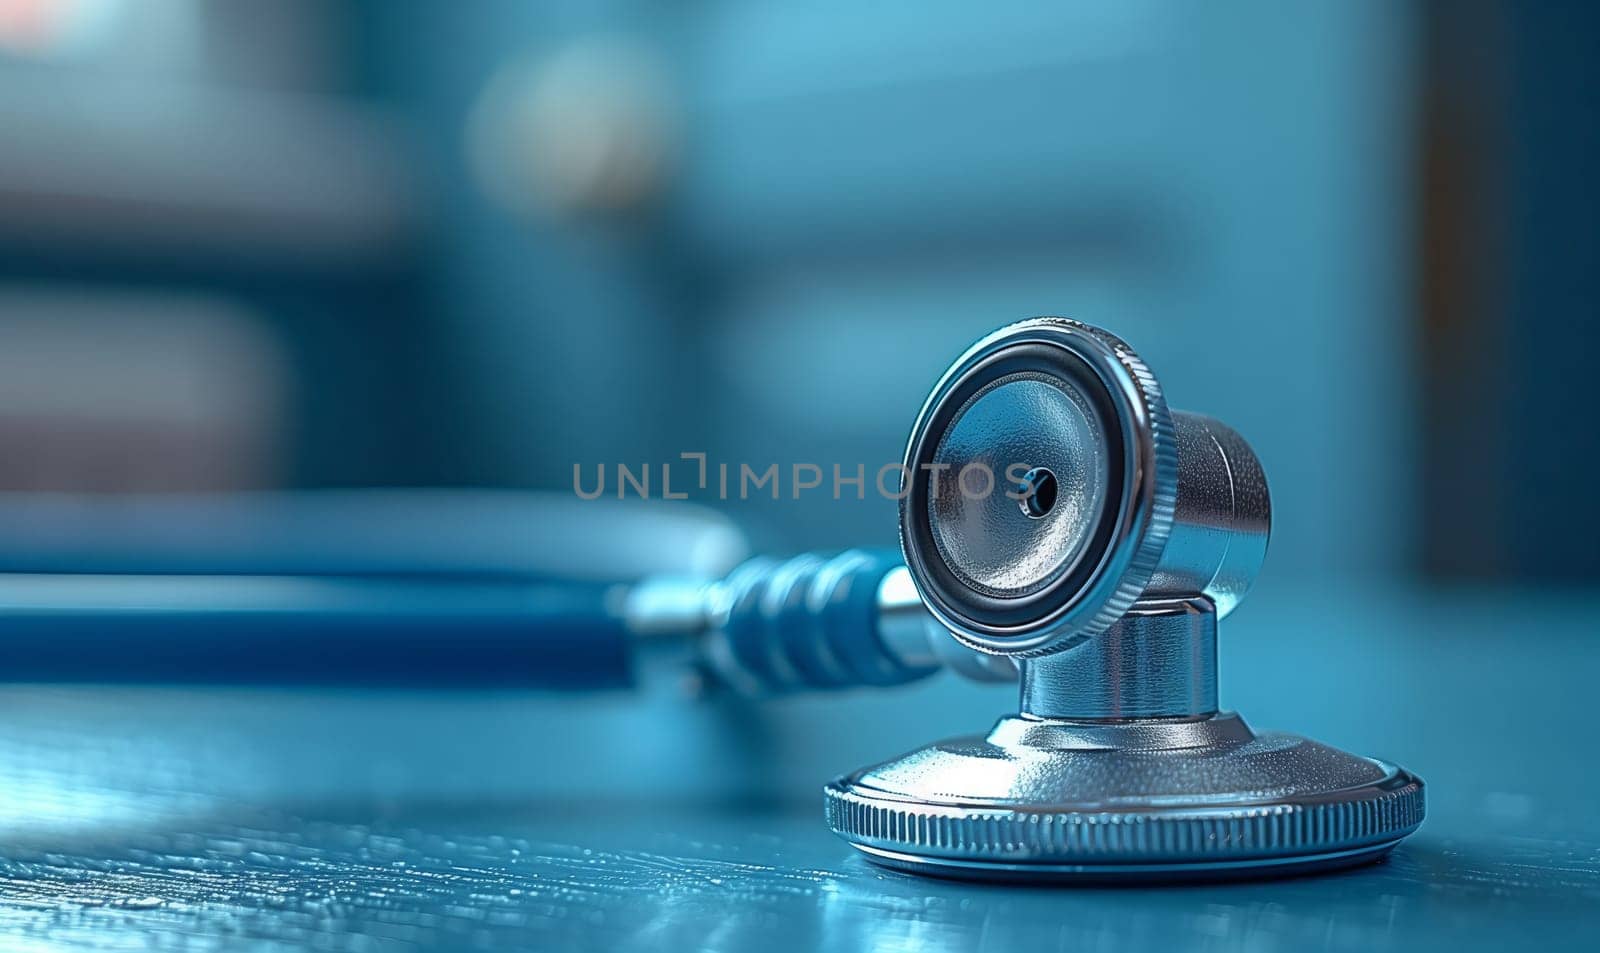 A macro photograph of a stethoscope on an electric blue table, showing intricate details of the medical gadgets design and texture